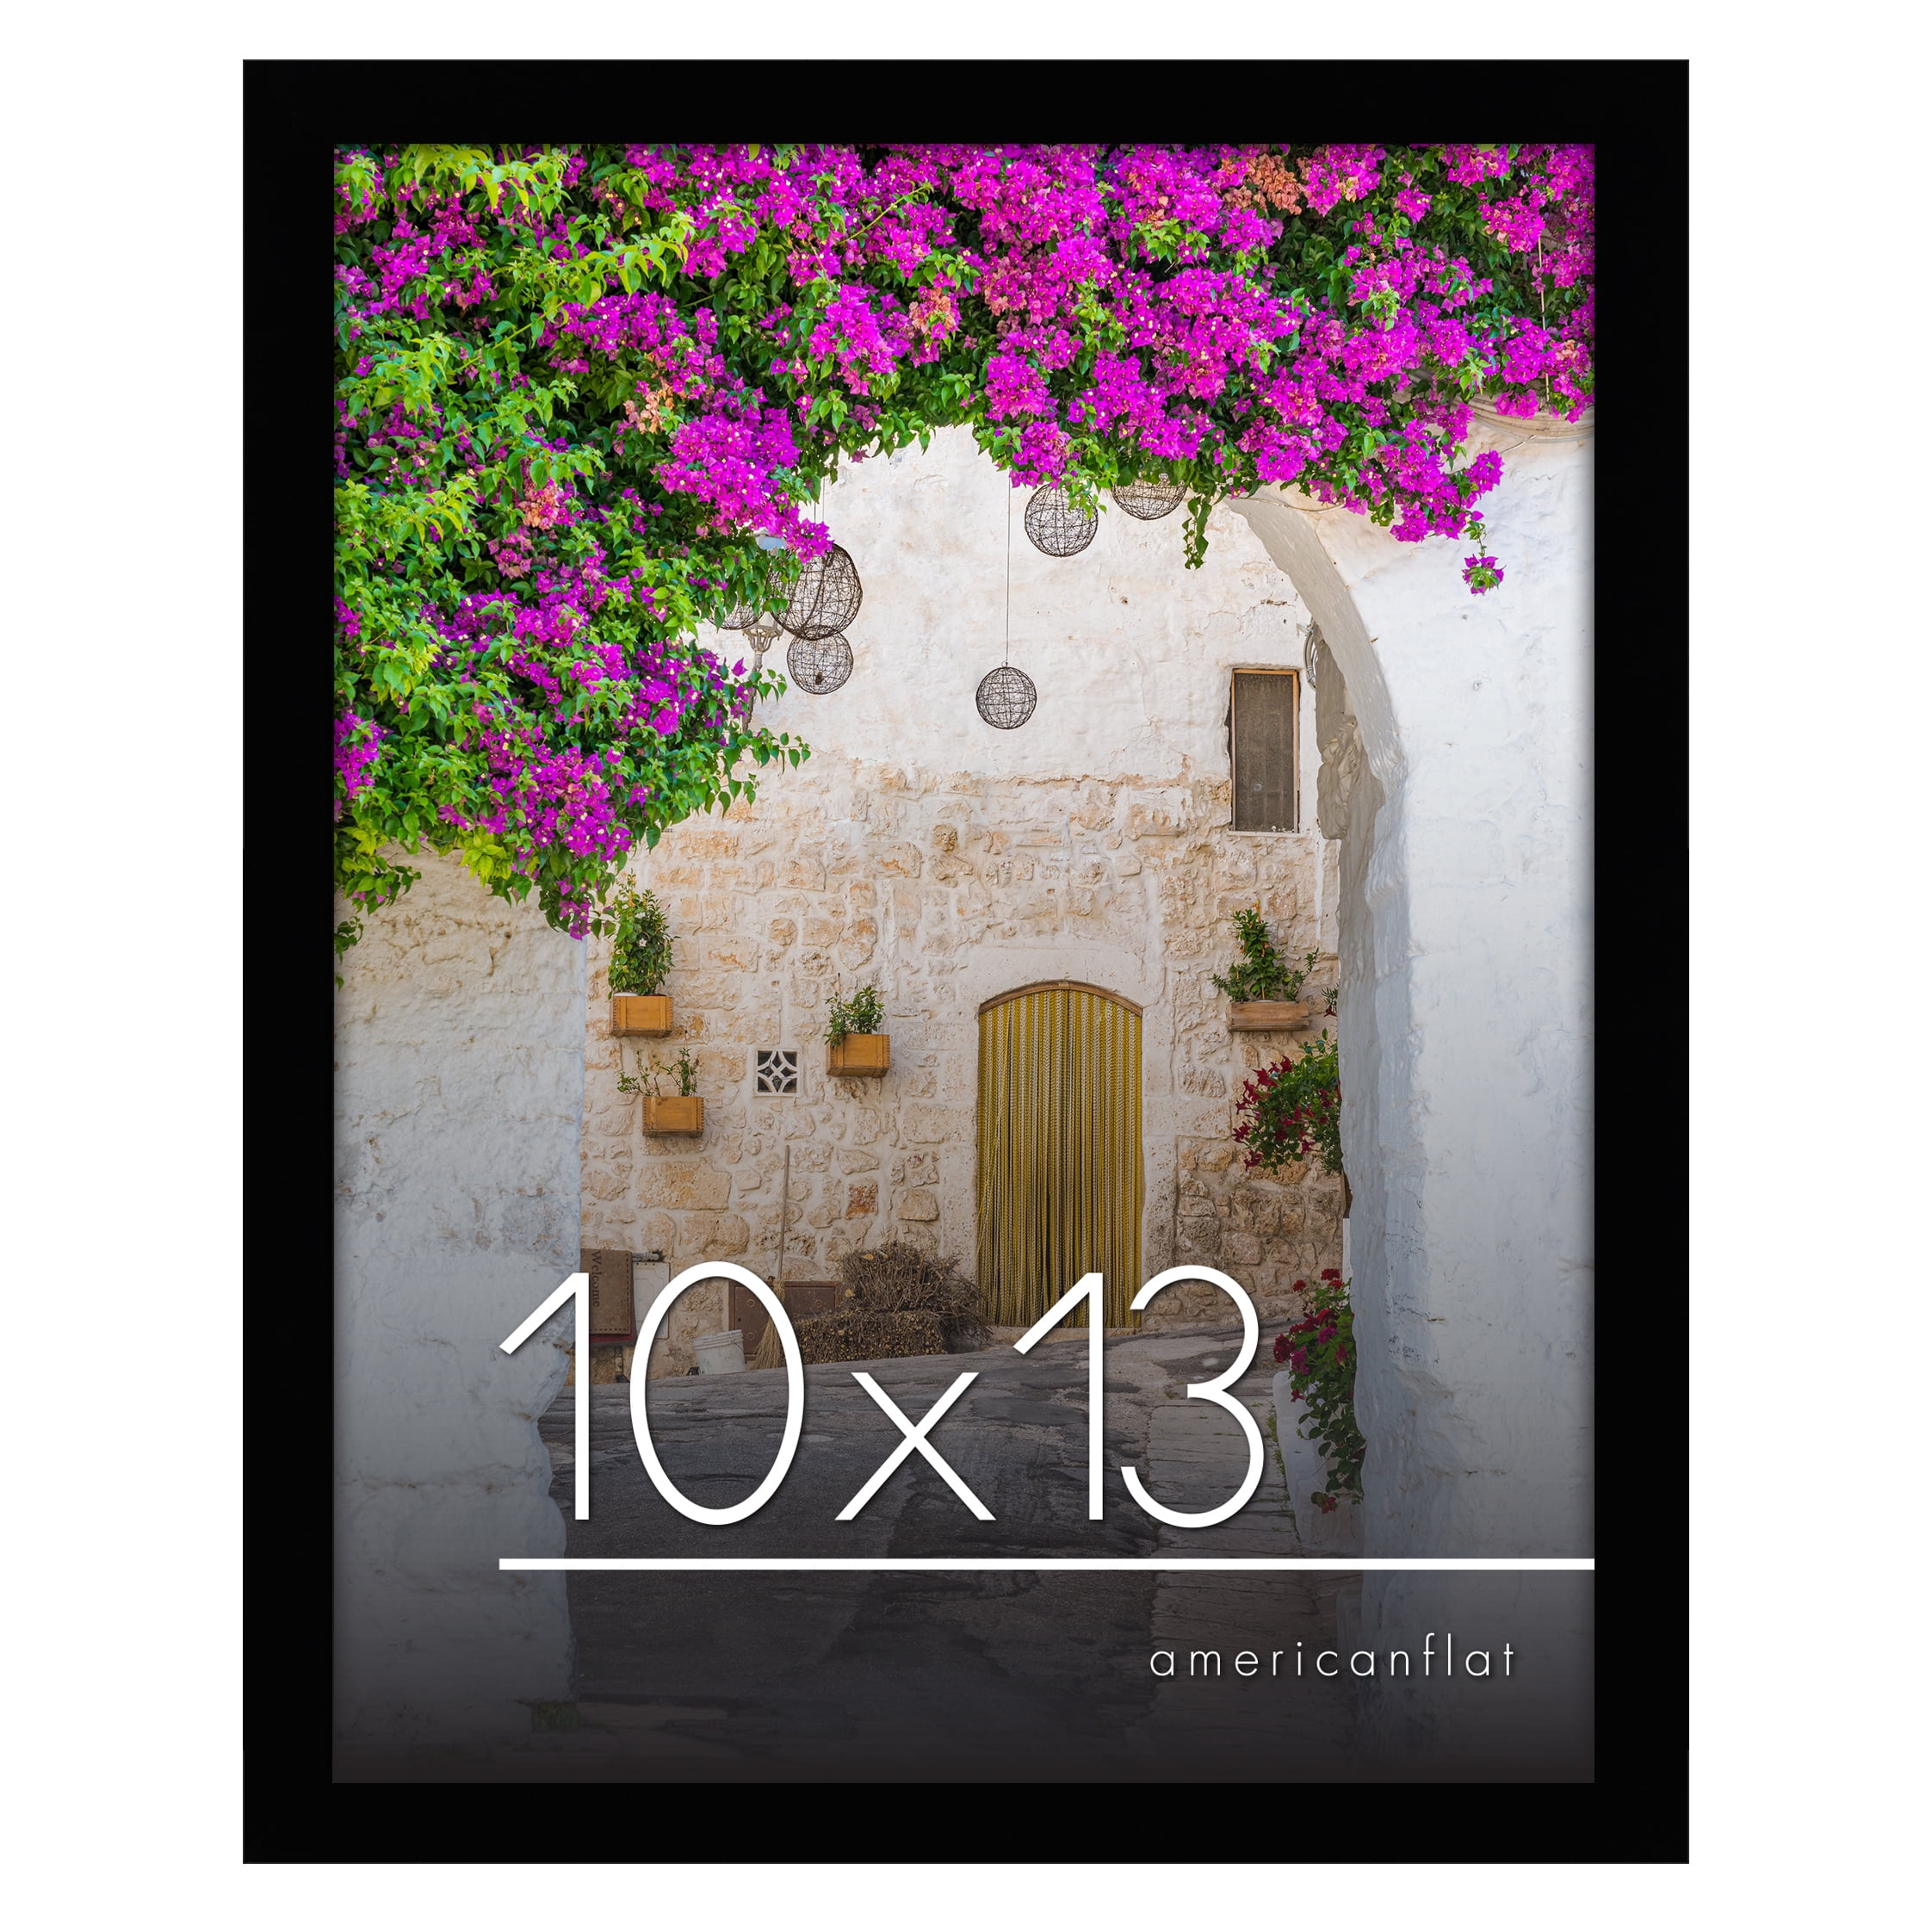 TheLAShop 10x13 A4 Poster Size Snap Frame 1 Profile Picture Display –